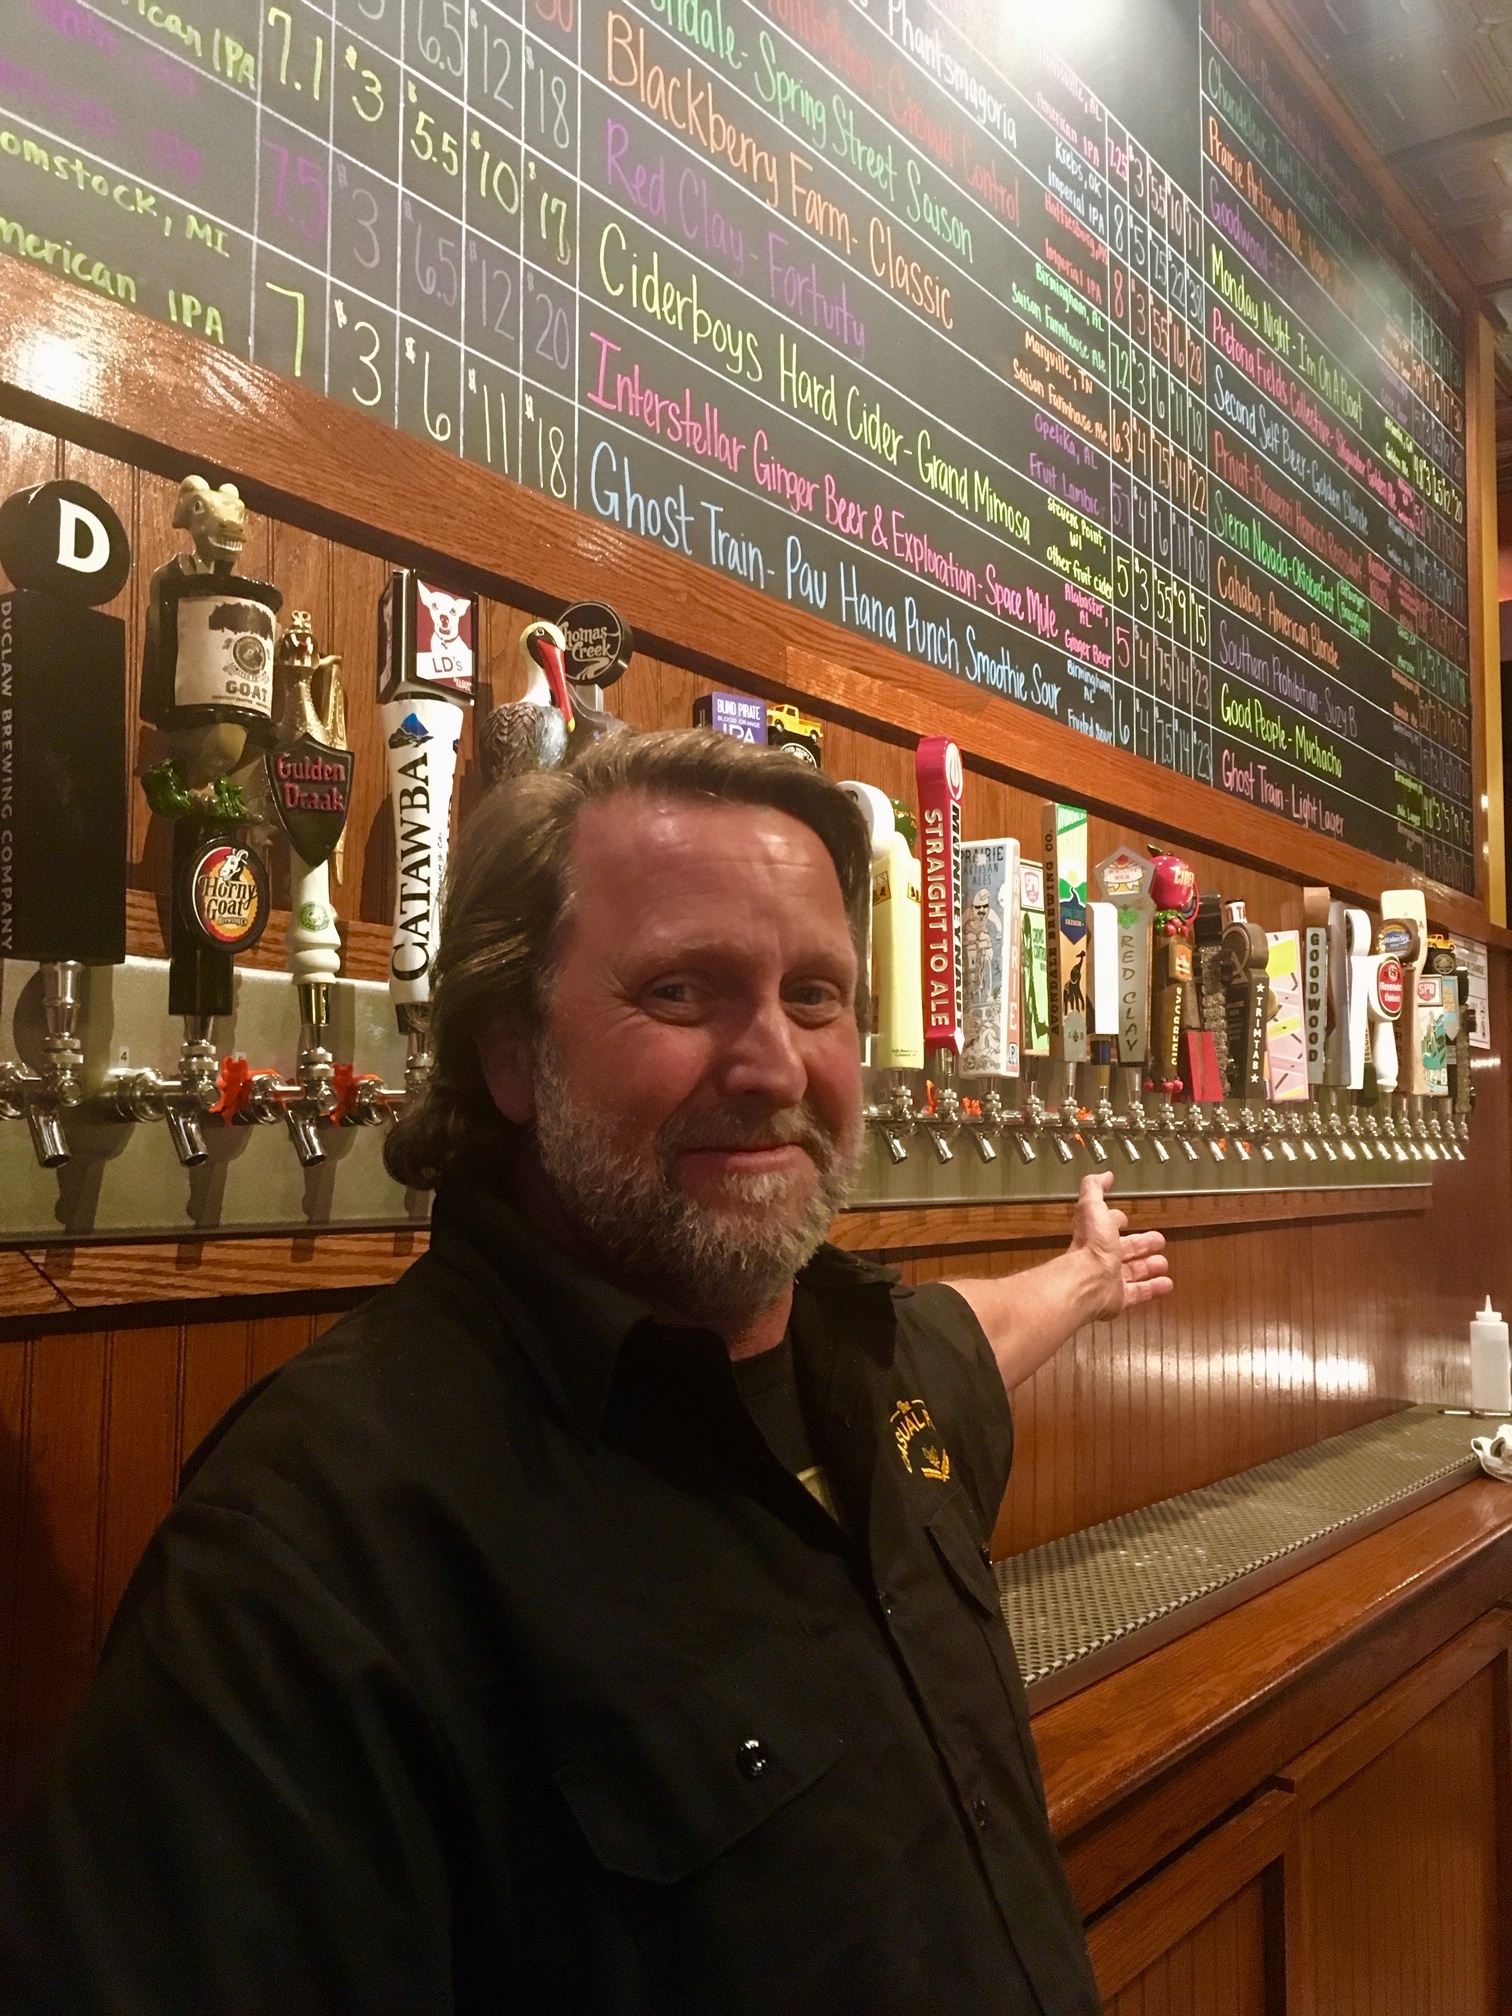 IMG 0417 1 Sneak peek: The Casual Pint at The Grove in Hoover is like "Cheers with craft beer"